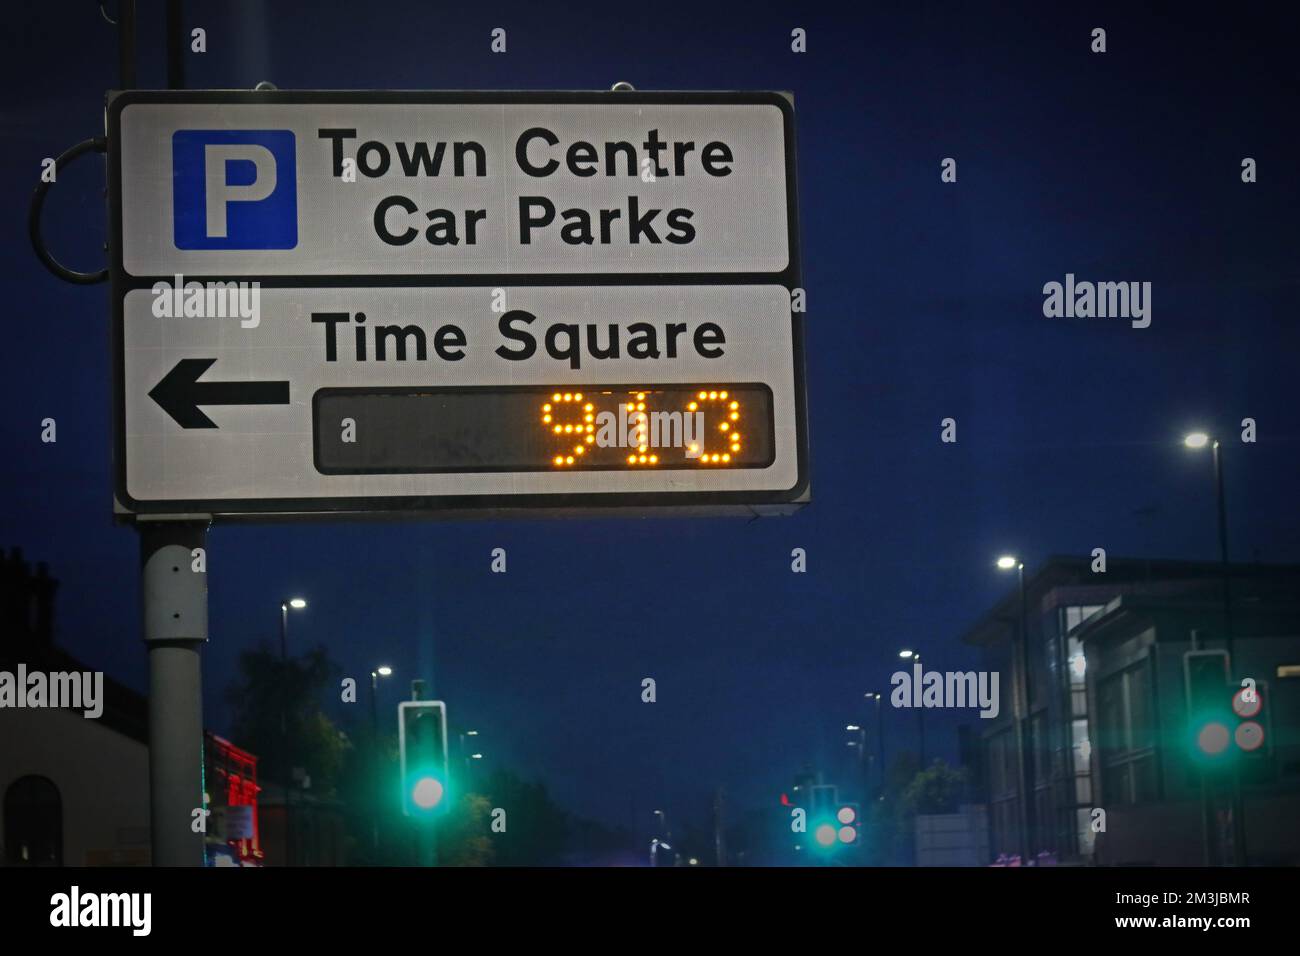 Warrington Town centre parking, Car parks sign, Time Square sign showing 913 spaces free, Cheshire, England, UK, WA1 Stock Photo